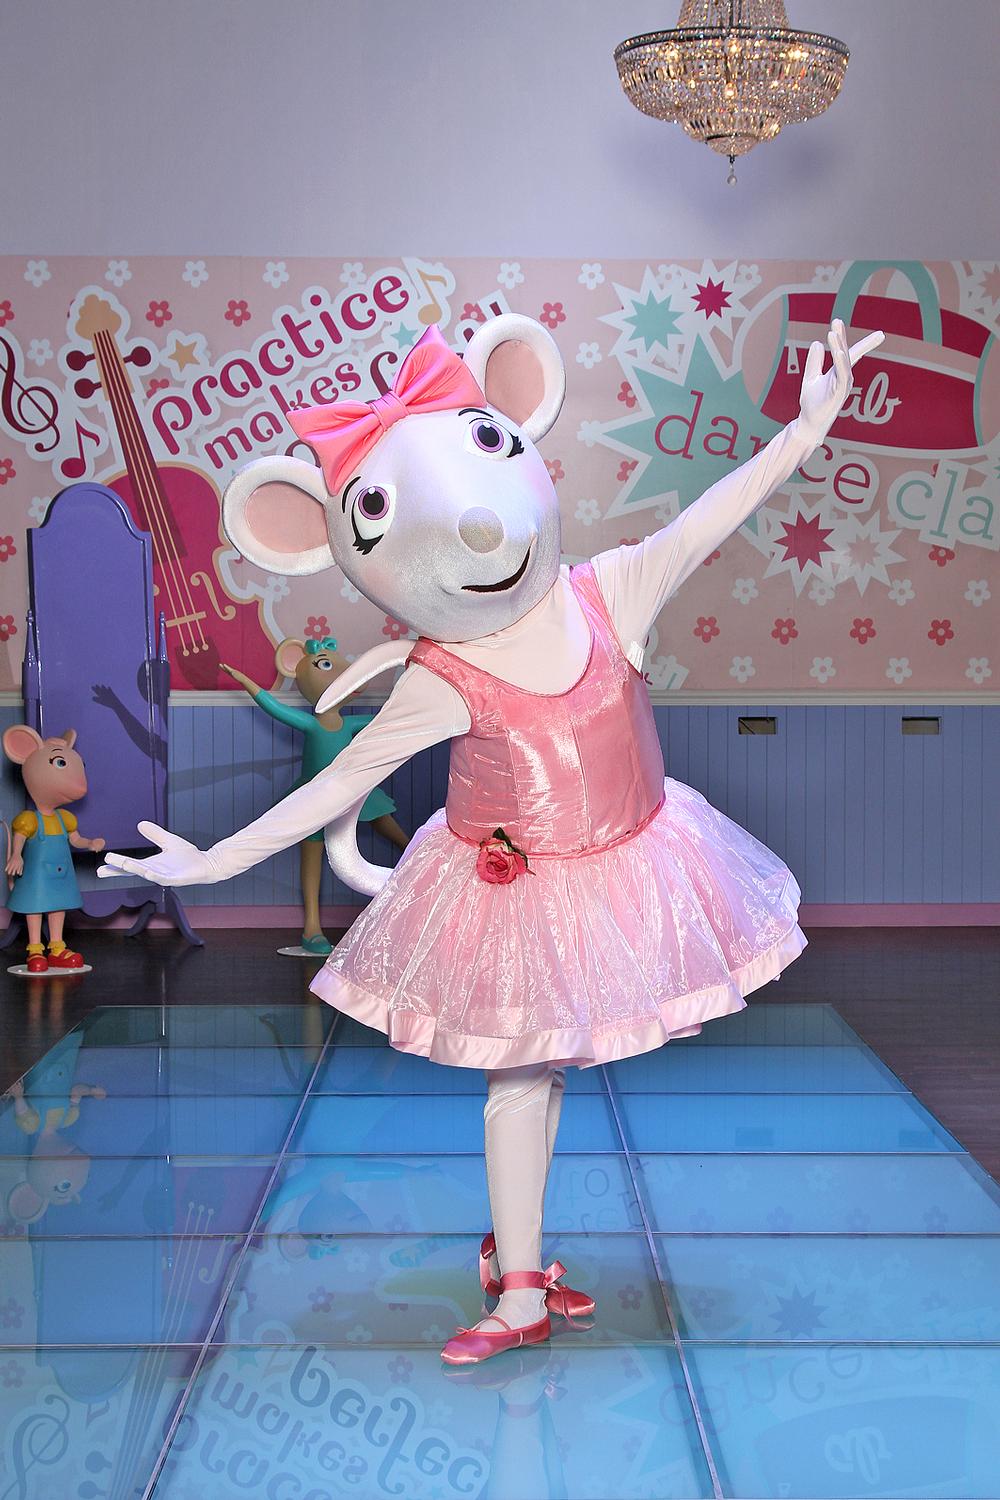 Young visitors can have a dance lesson with Angelina Ballerina